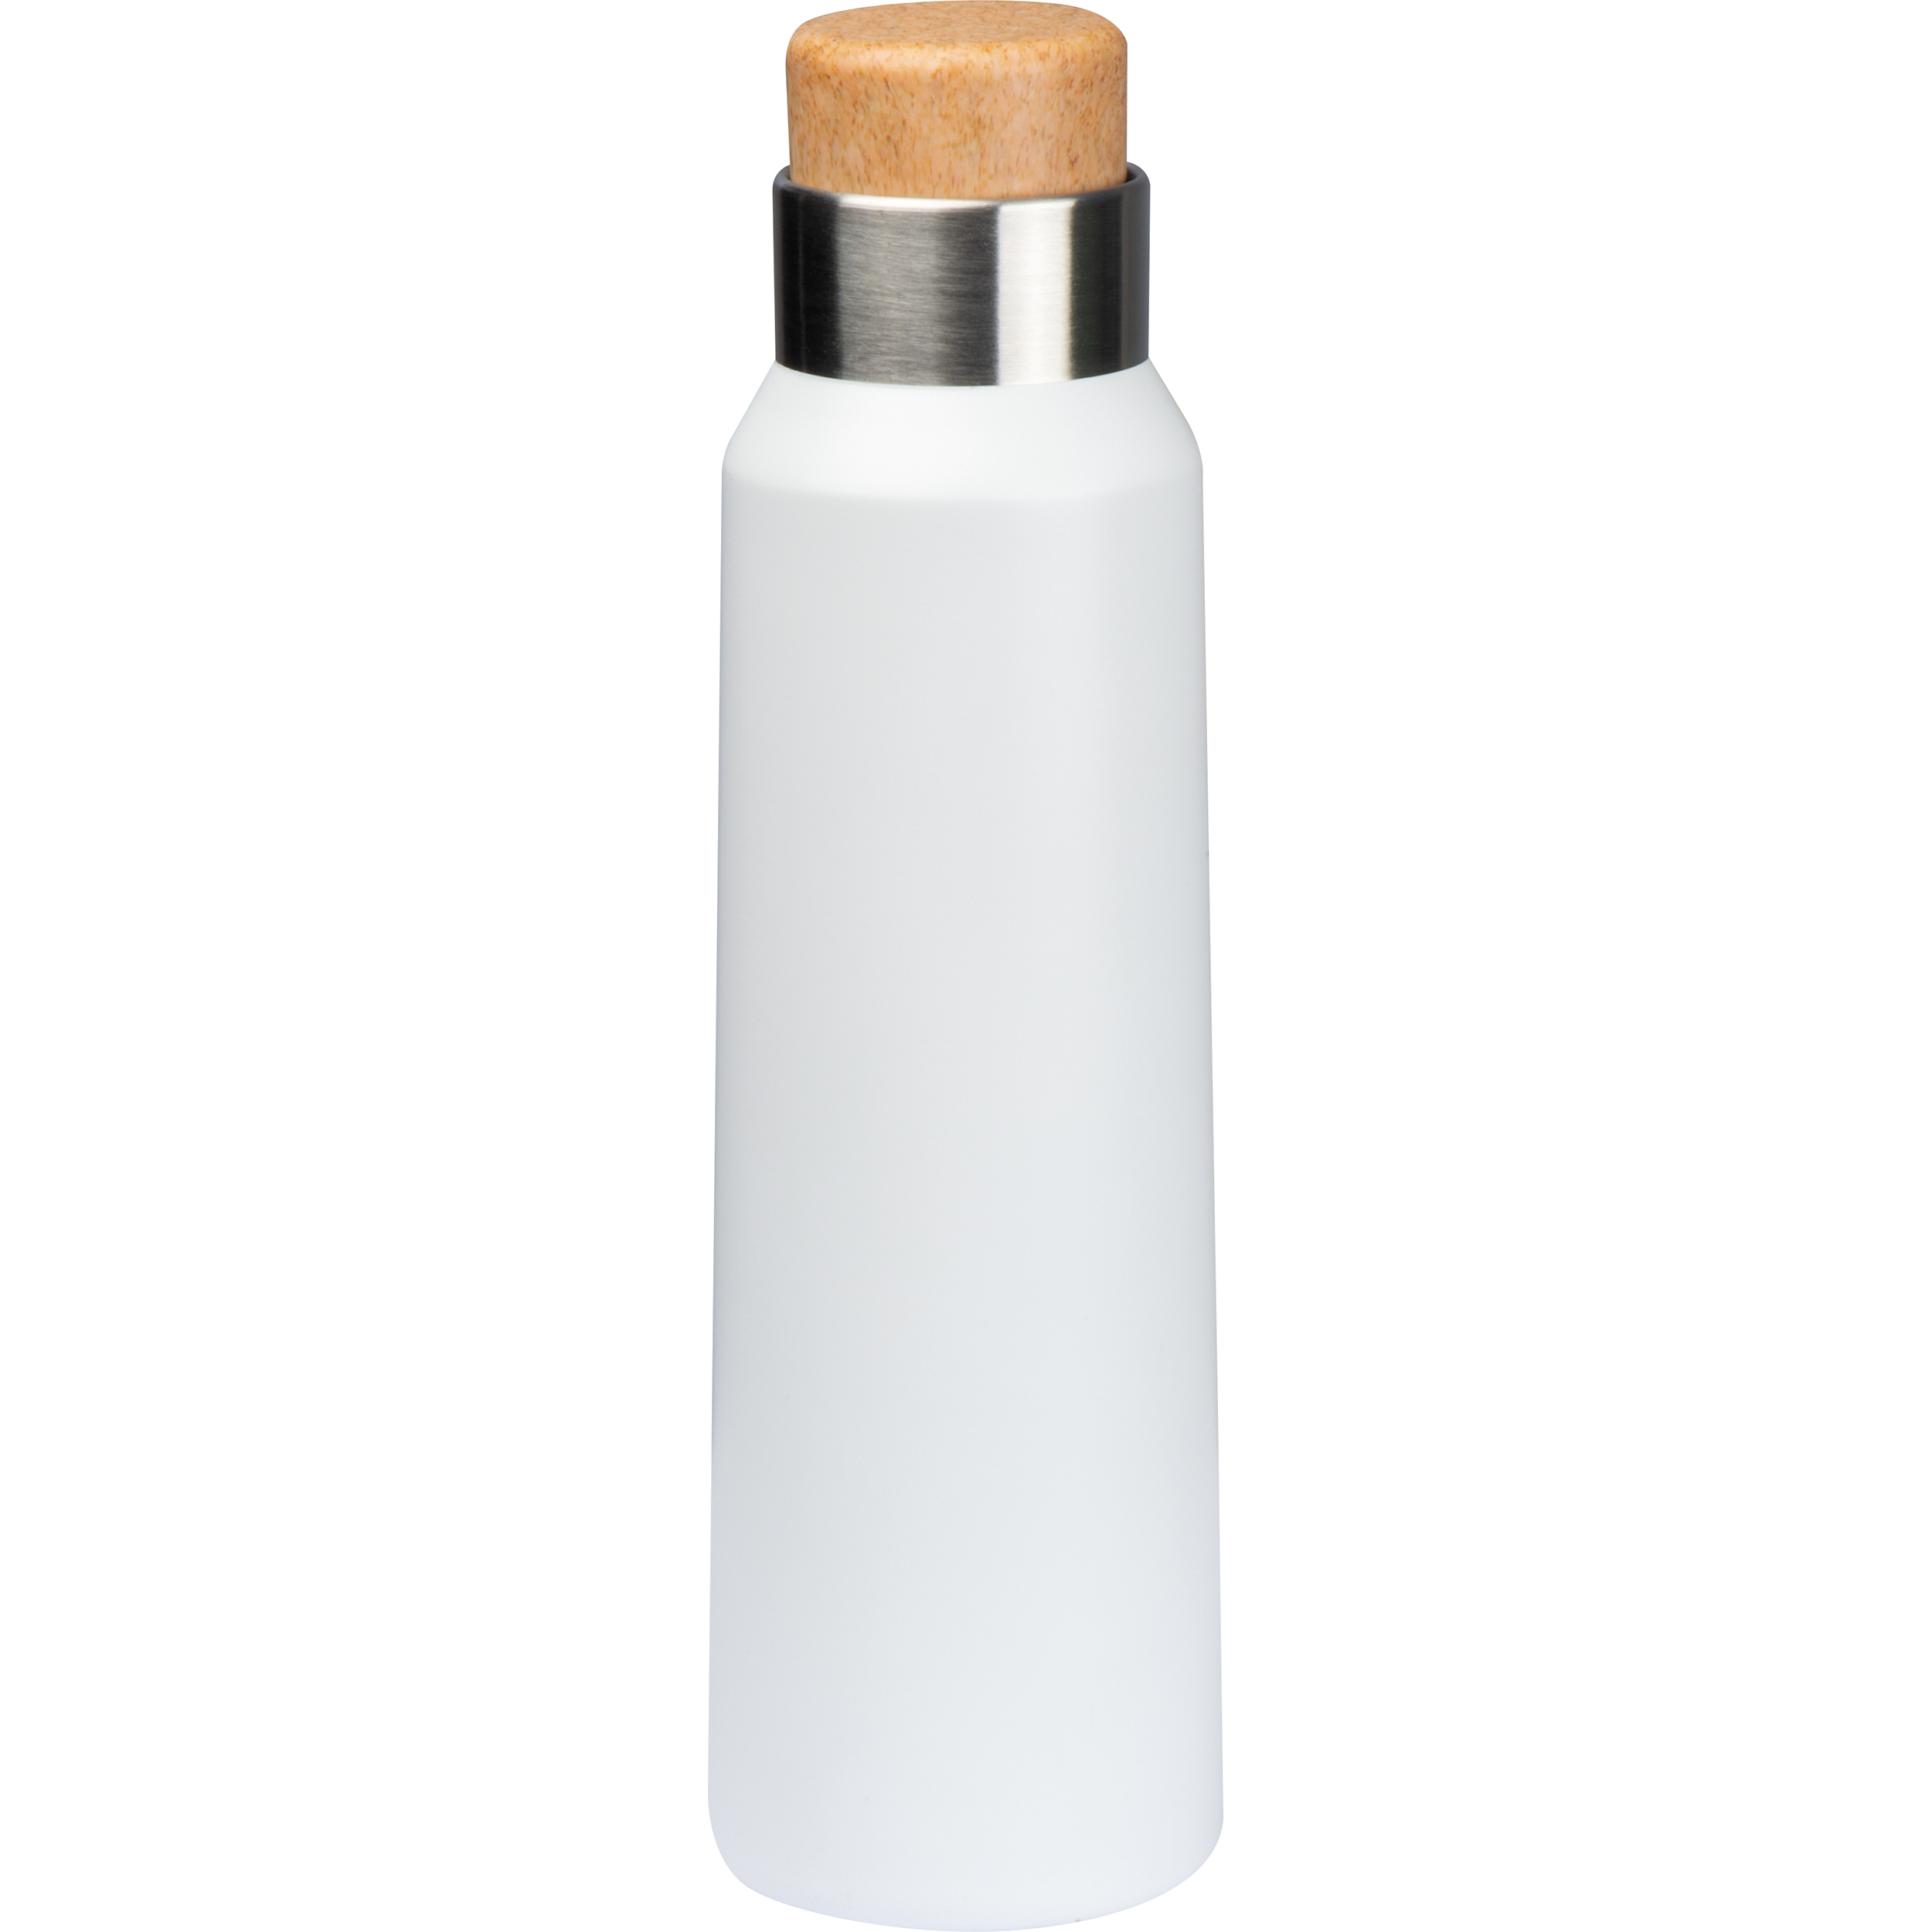 Thermos flask with wooden cap 500 ml